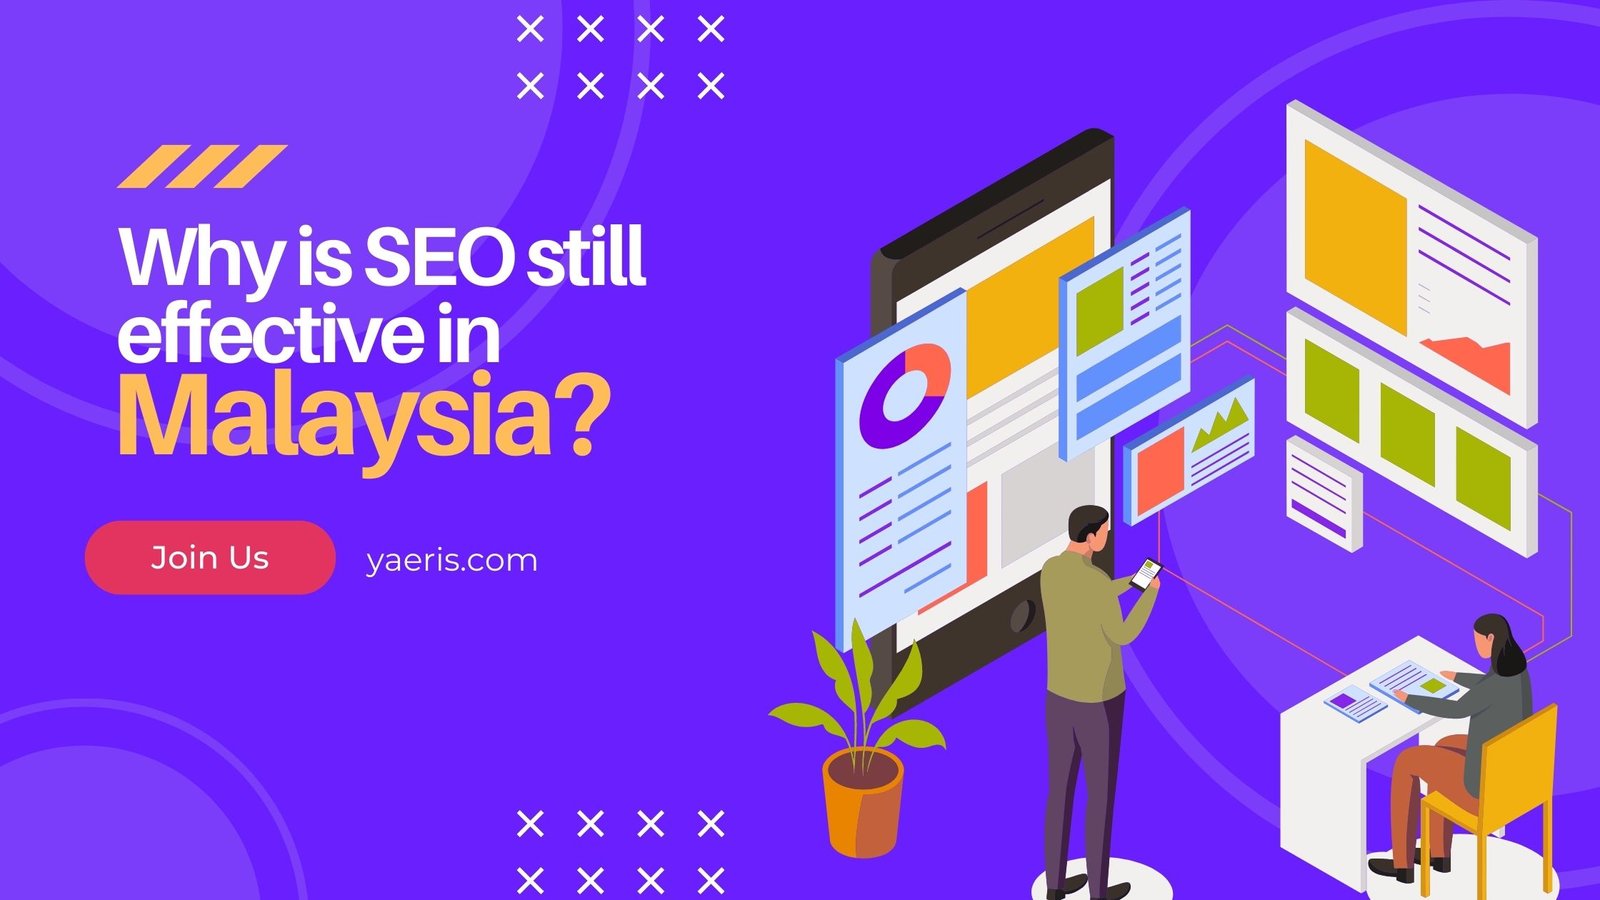 Why is SEO still effective in Malaysia?